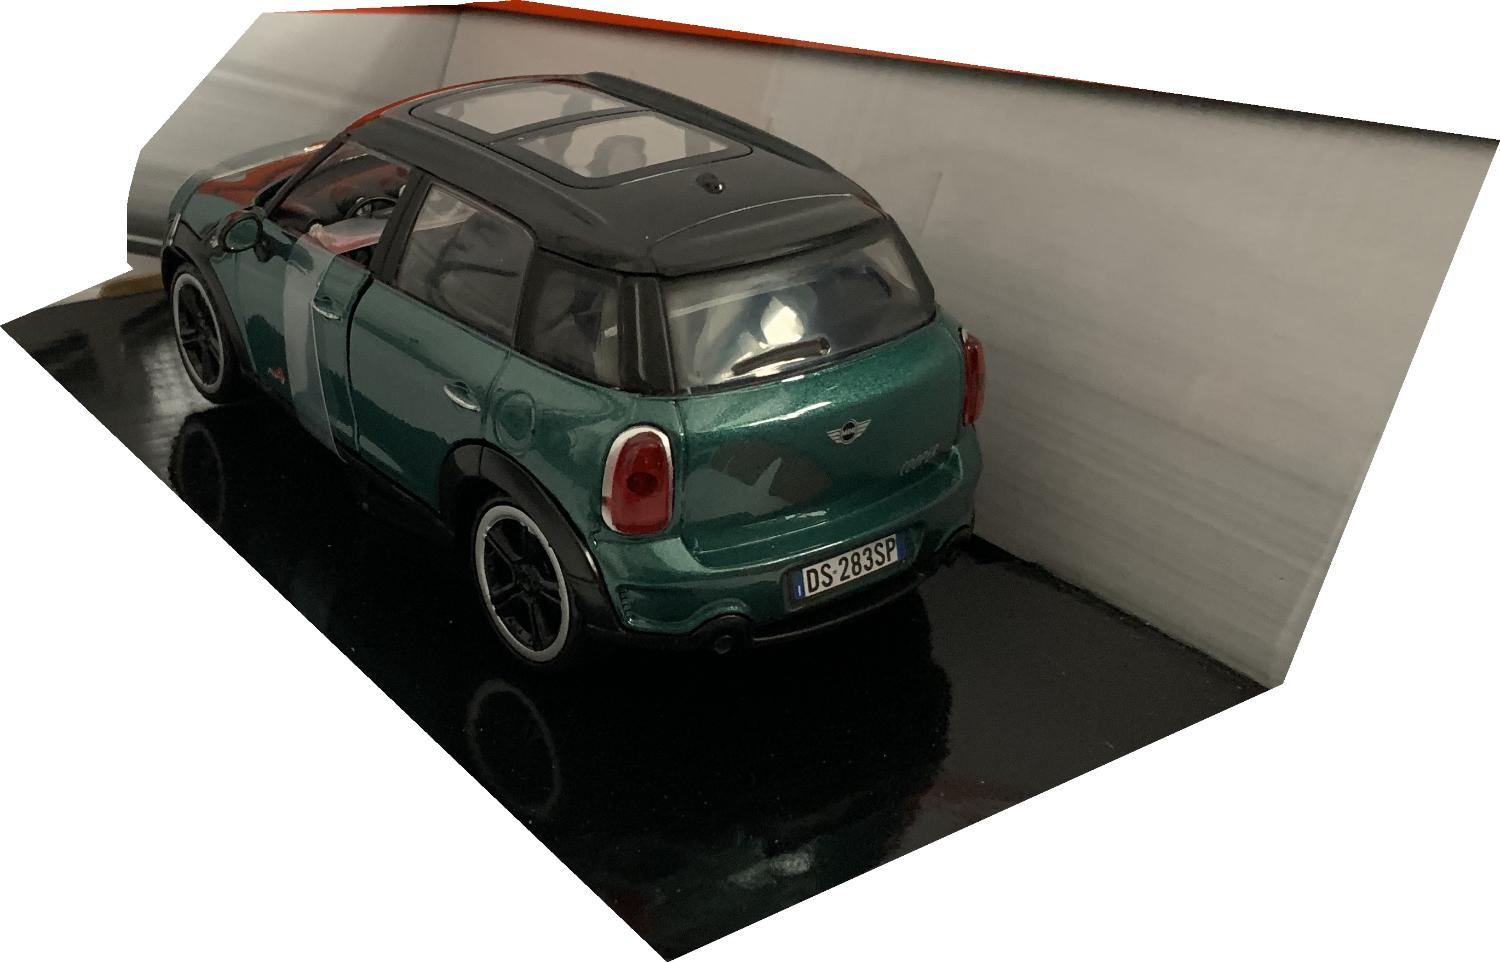 Mini Cooper S Countryman in green with black roof 1:24 scale model from Motormax, Opening driver and passenger doors, opening bonnet